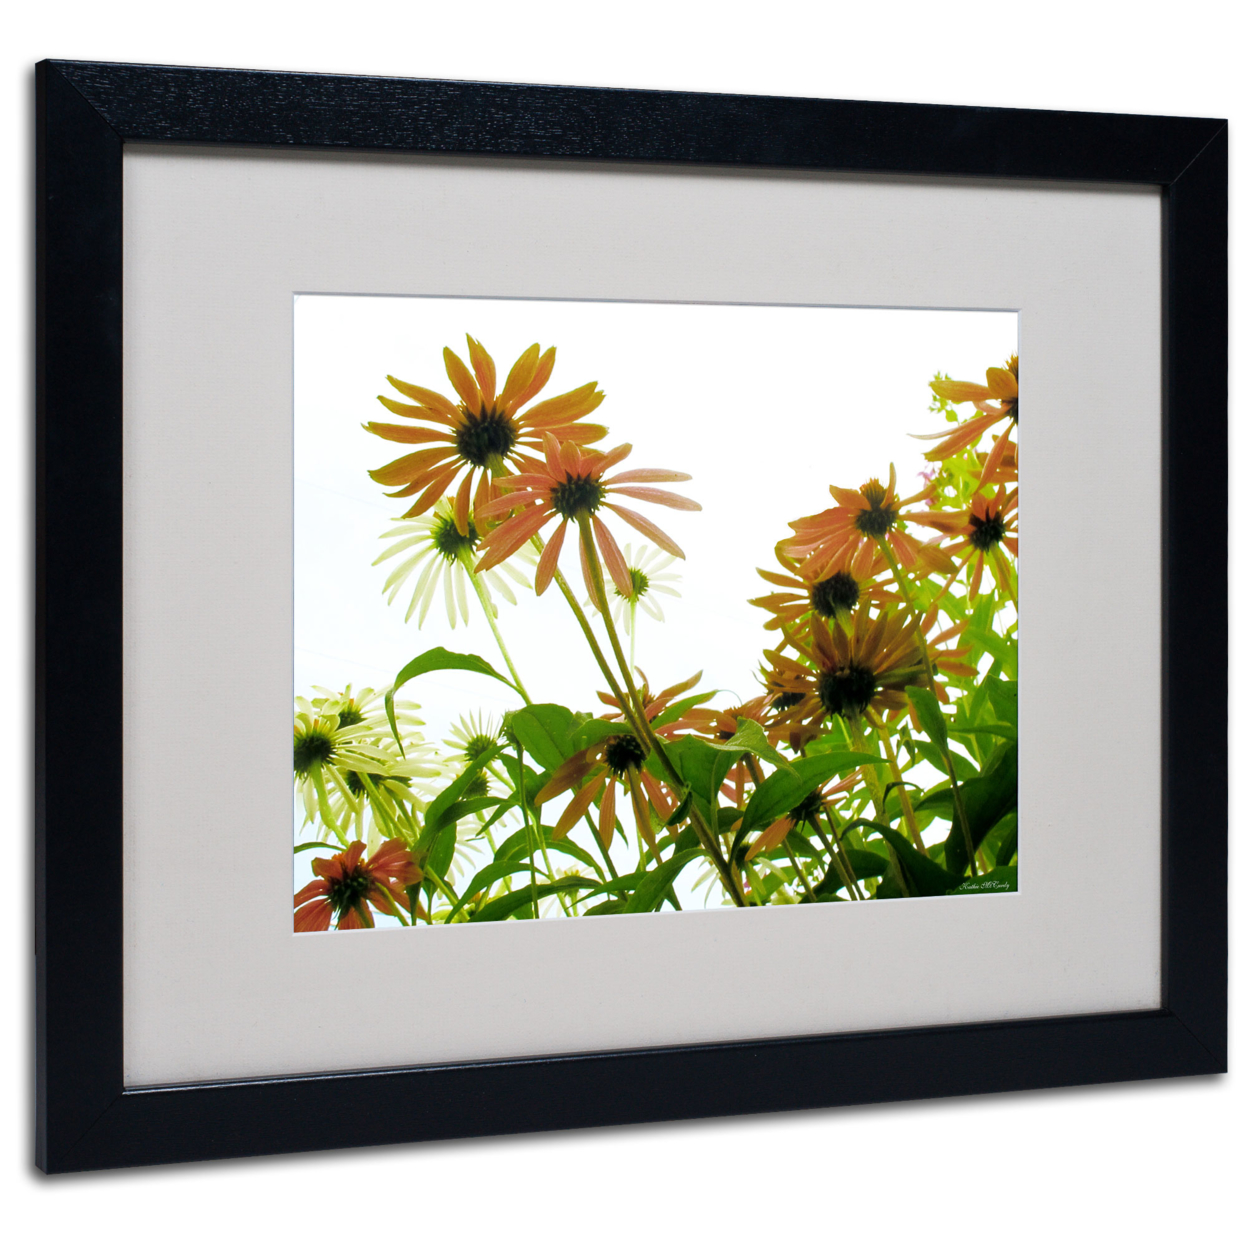 Kathie McCurdy 'Orange Coneflowers' Black Wooden Framed Art 18 X 22 Inches